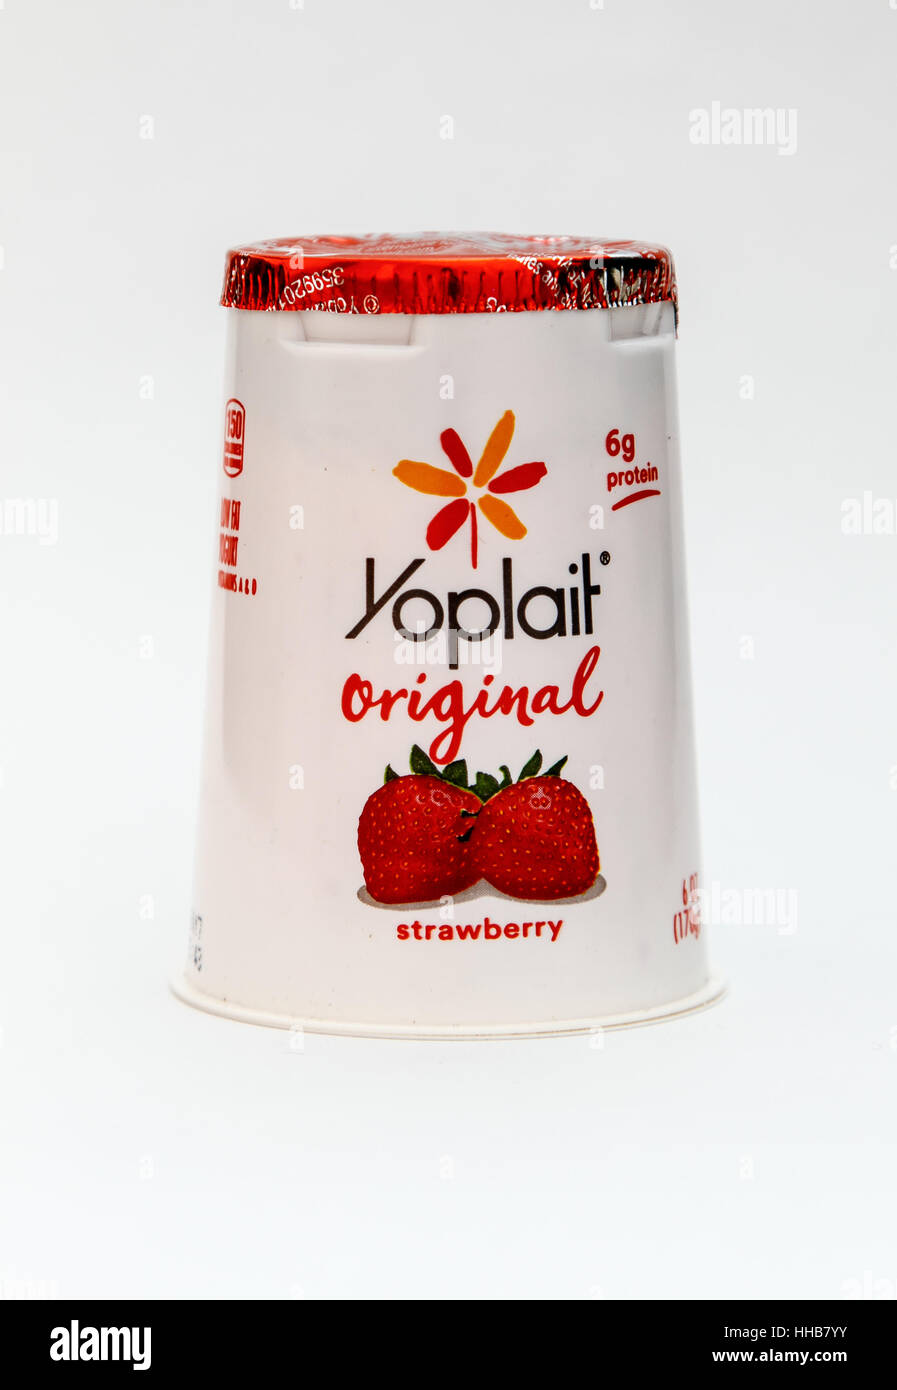 A strawberry flavored Yoplait yogurt is seen against white background. Stock Photo